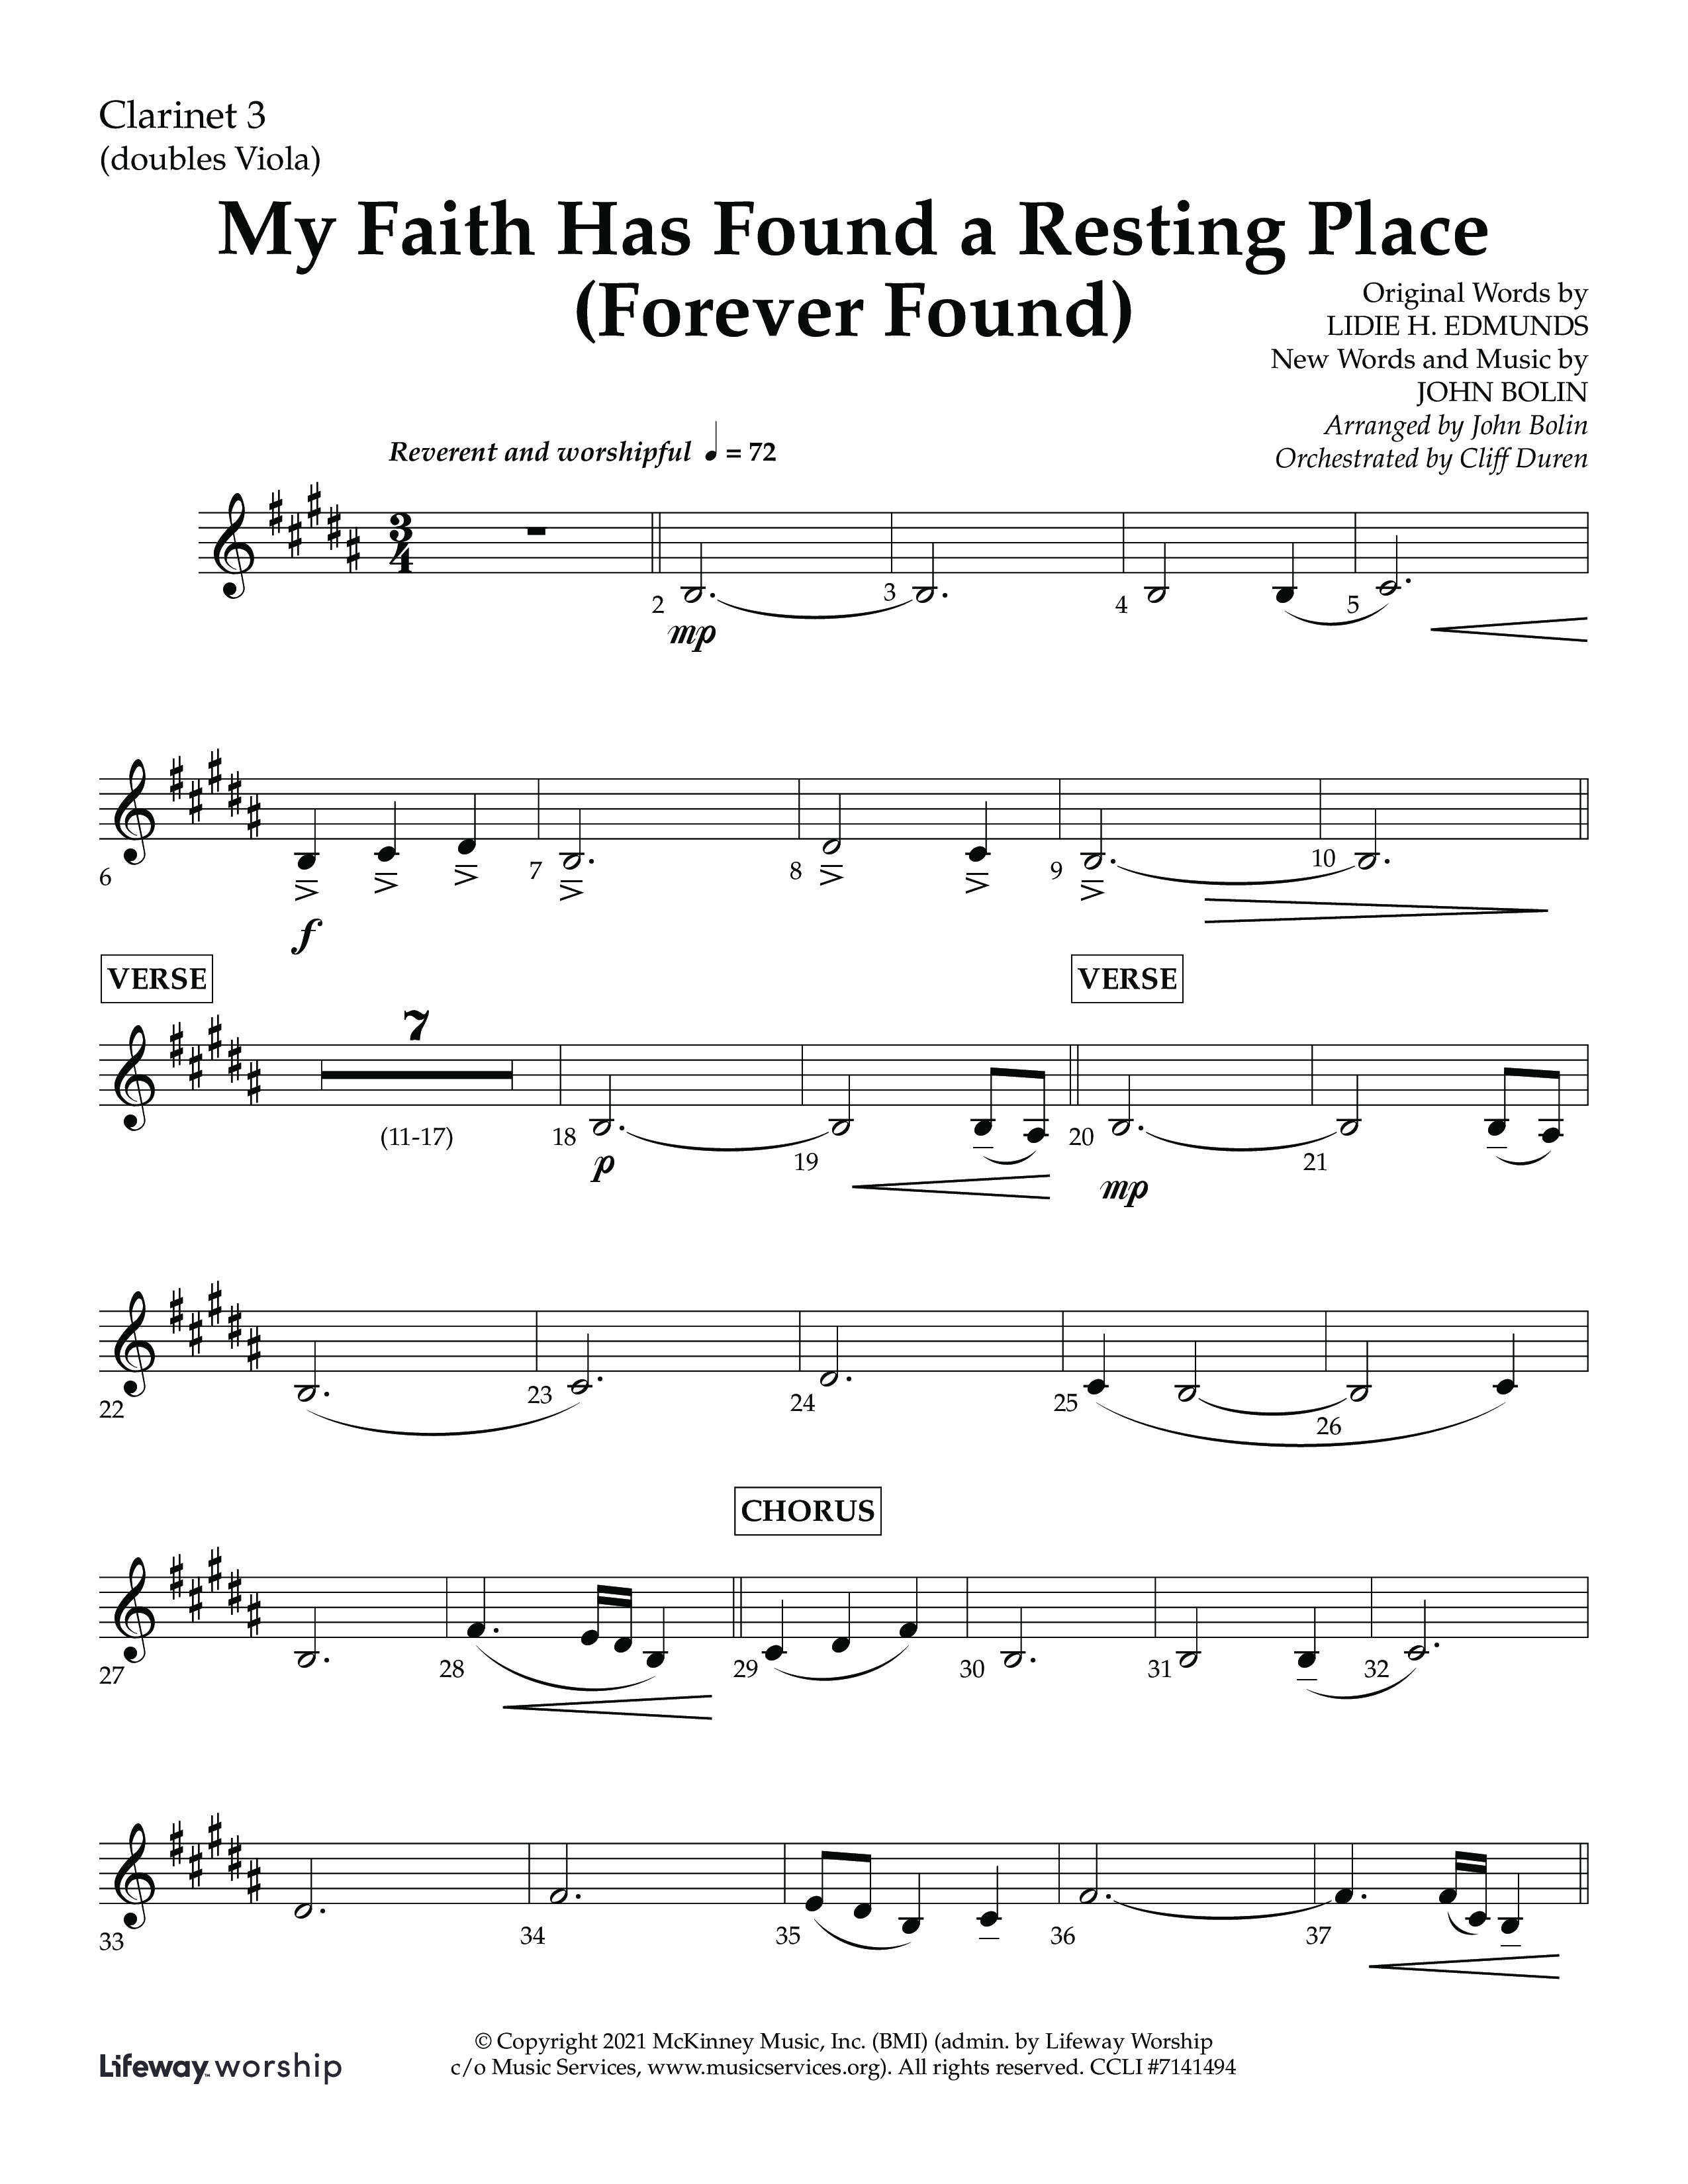 My Faith Has Found a Resting Place (Forever Found) (Choral Anthem SATB) Clarinet 3 (Lifeway Choral / Arr. John Bolin / Orch. Cliff Duren)